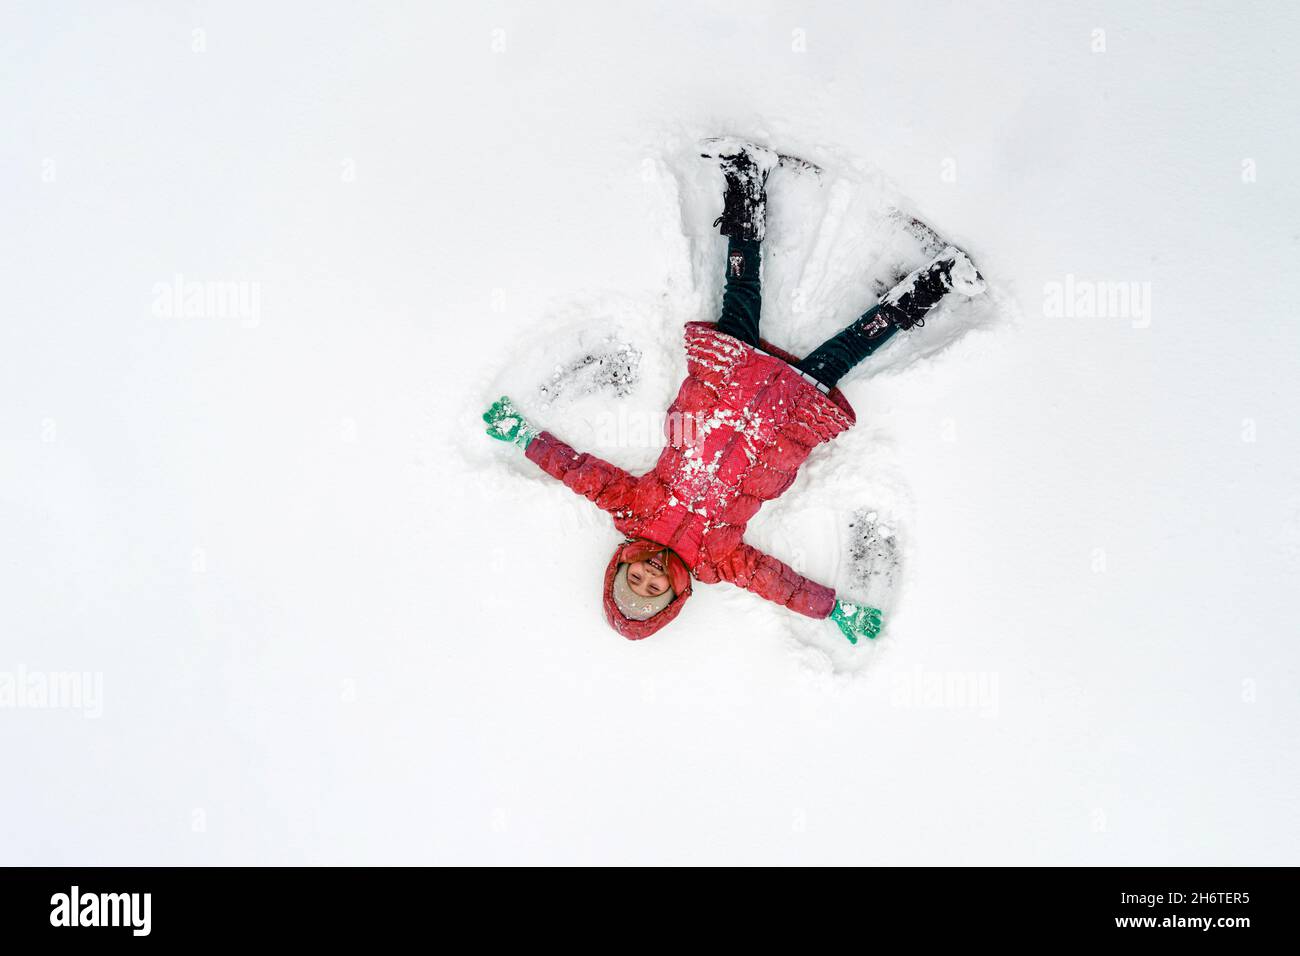 Active children in a red jacket outdoors on Xmas day. Child making snow angel on sunny winter morning. Kids winter outdoor fun. Family Christmas vacat Stock Photo